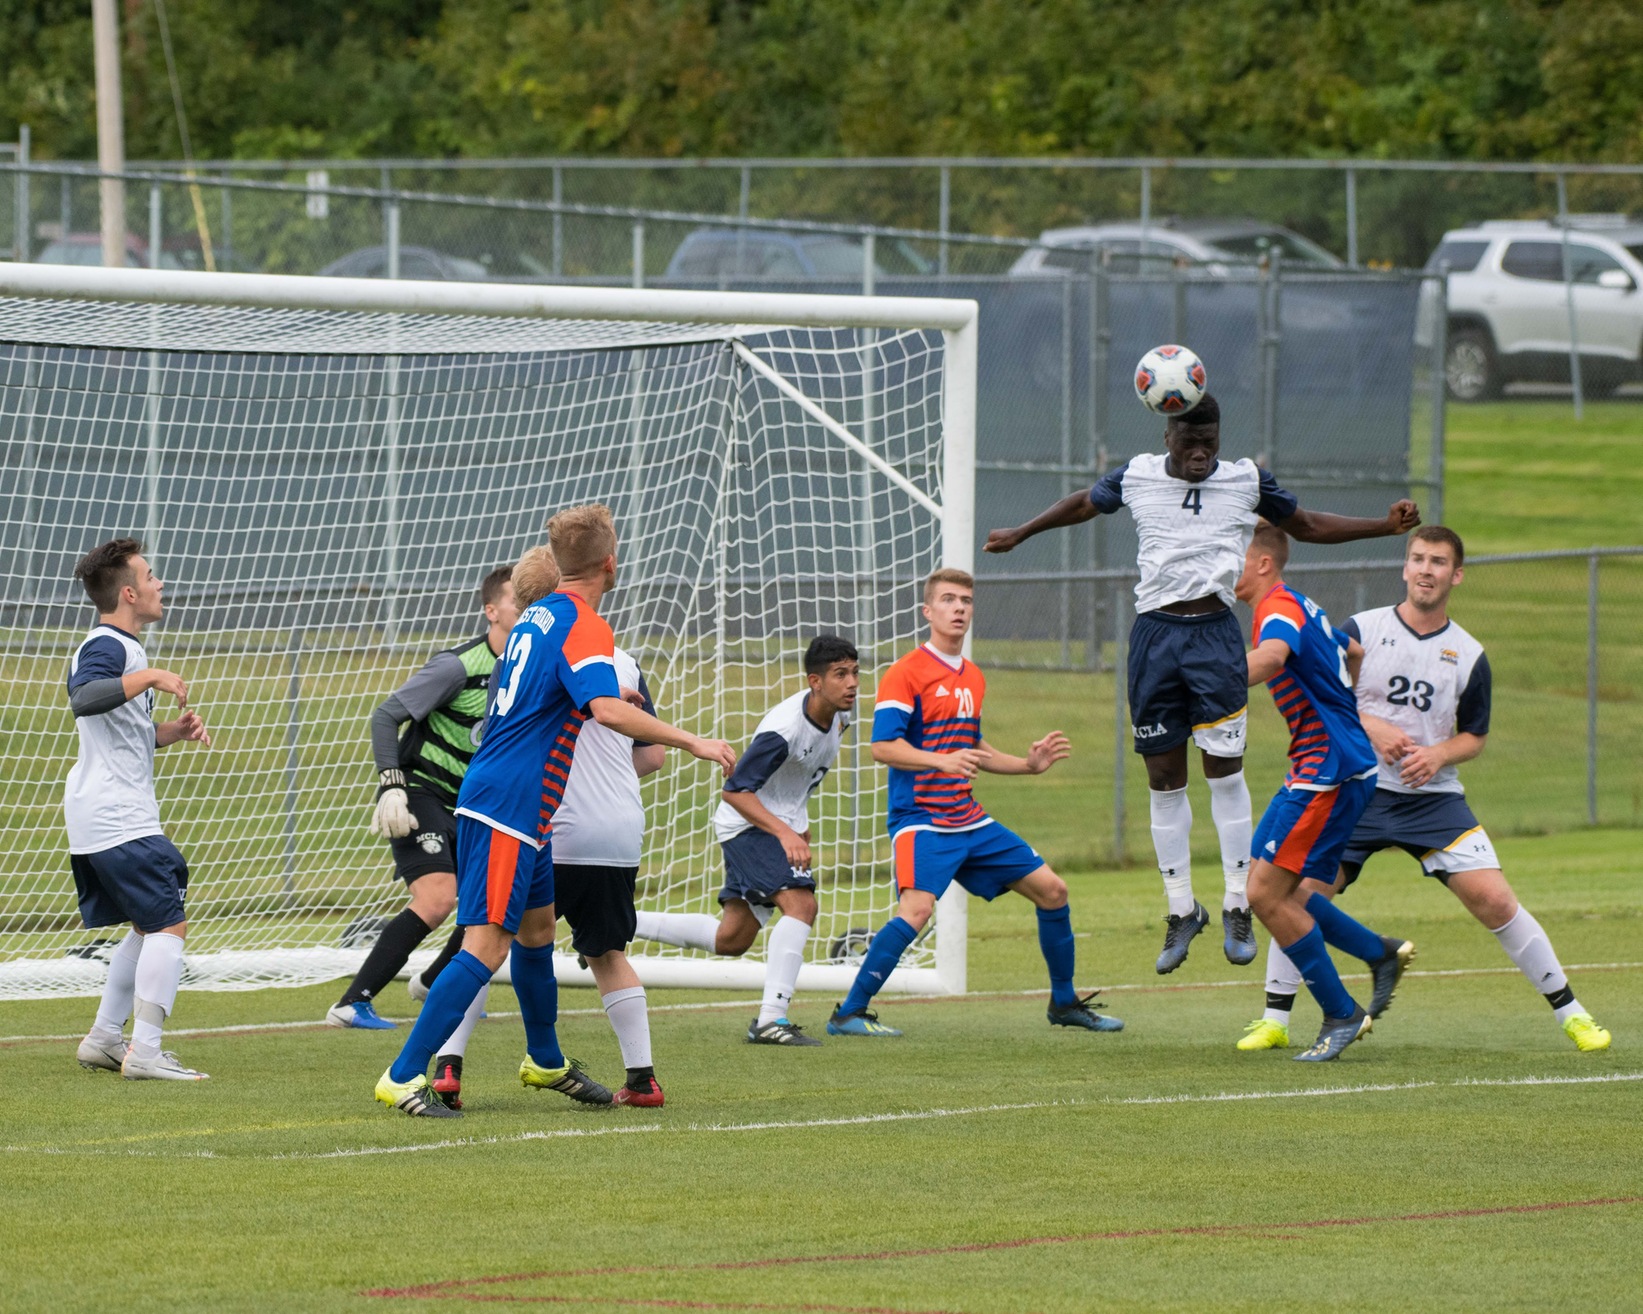 Men's Soccer blanked at home by Pine Manor 5-0